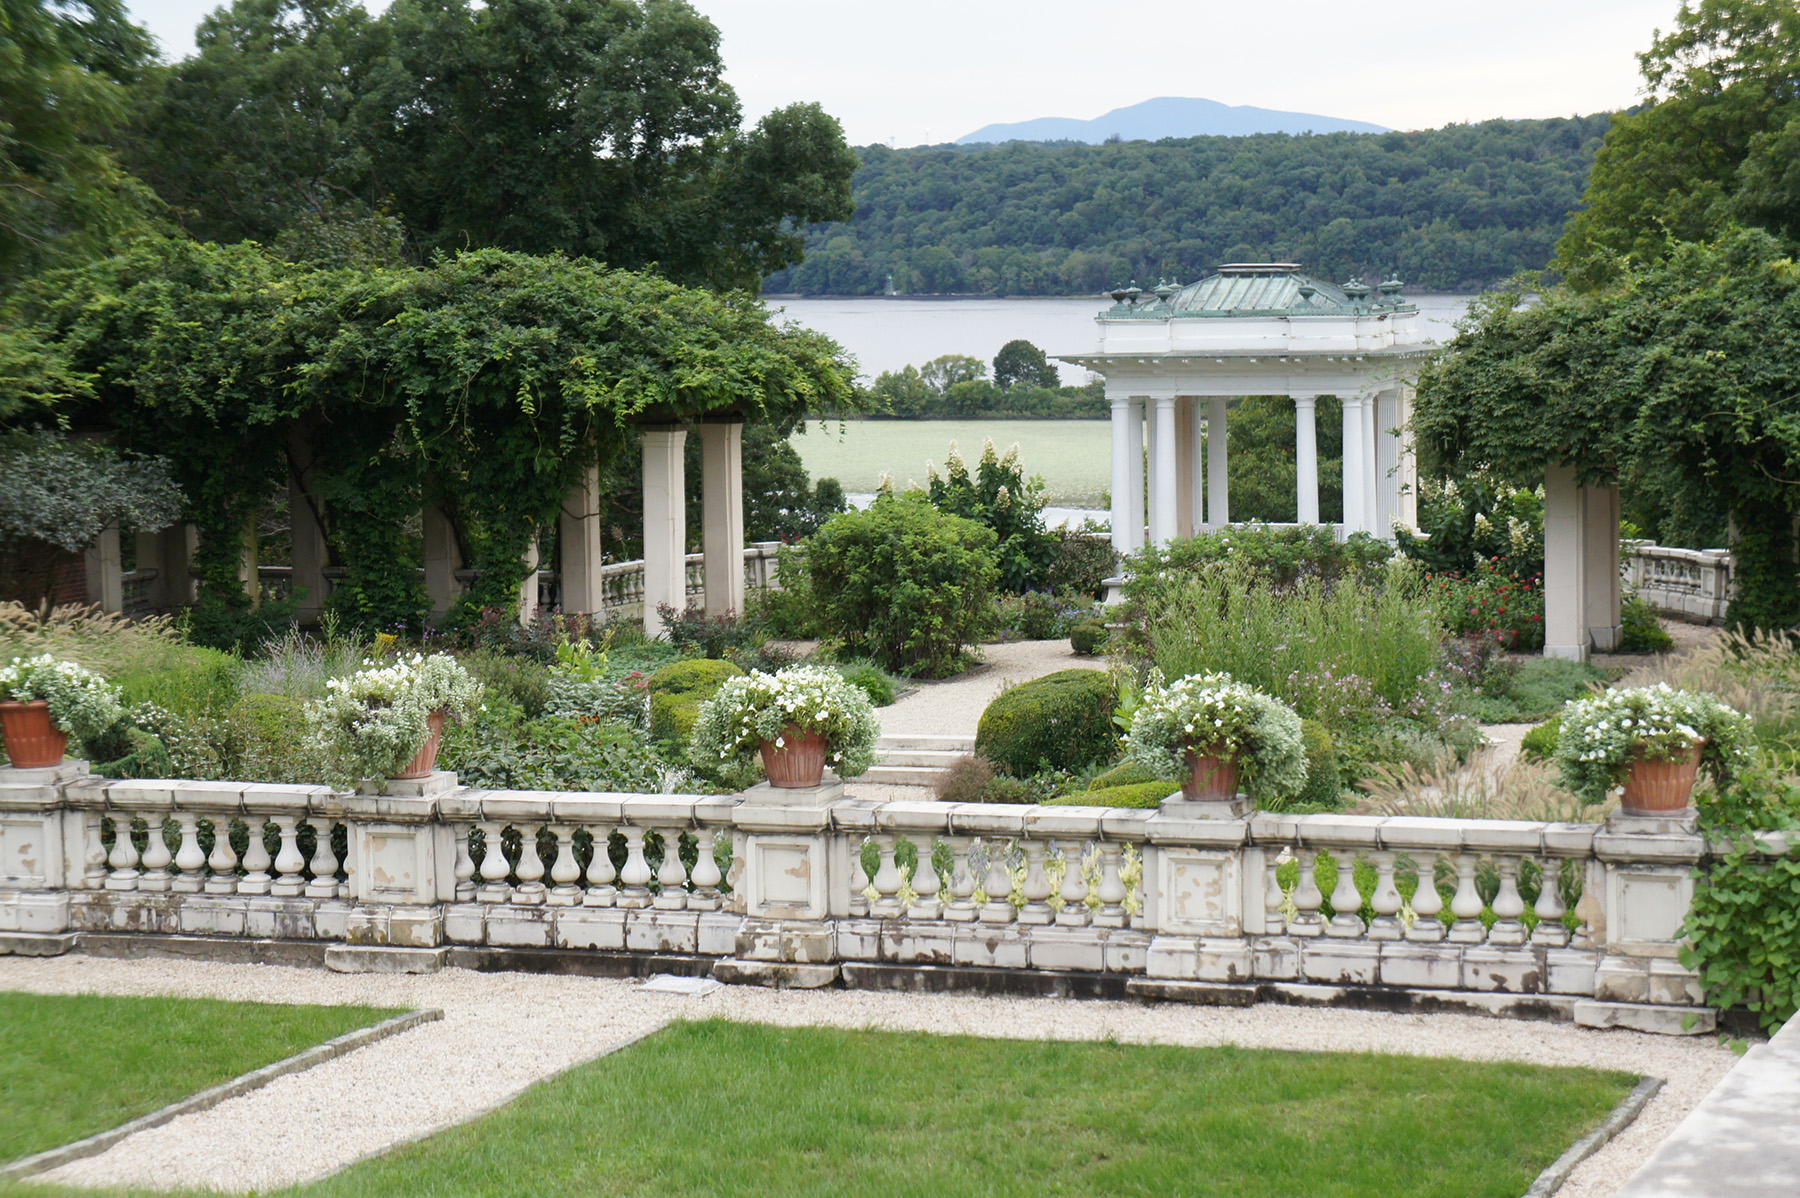 Bard College Receives $93,000 from the Garden Conservancy for Blithewood Garden Rehabilitation